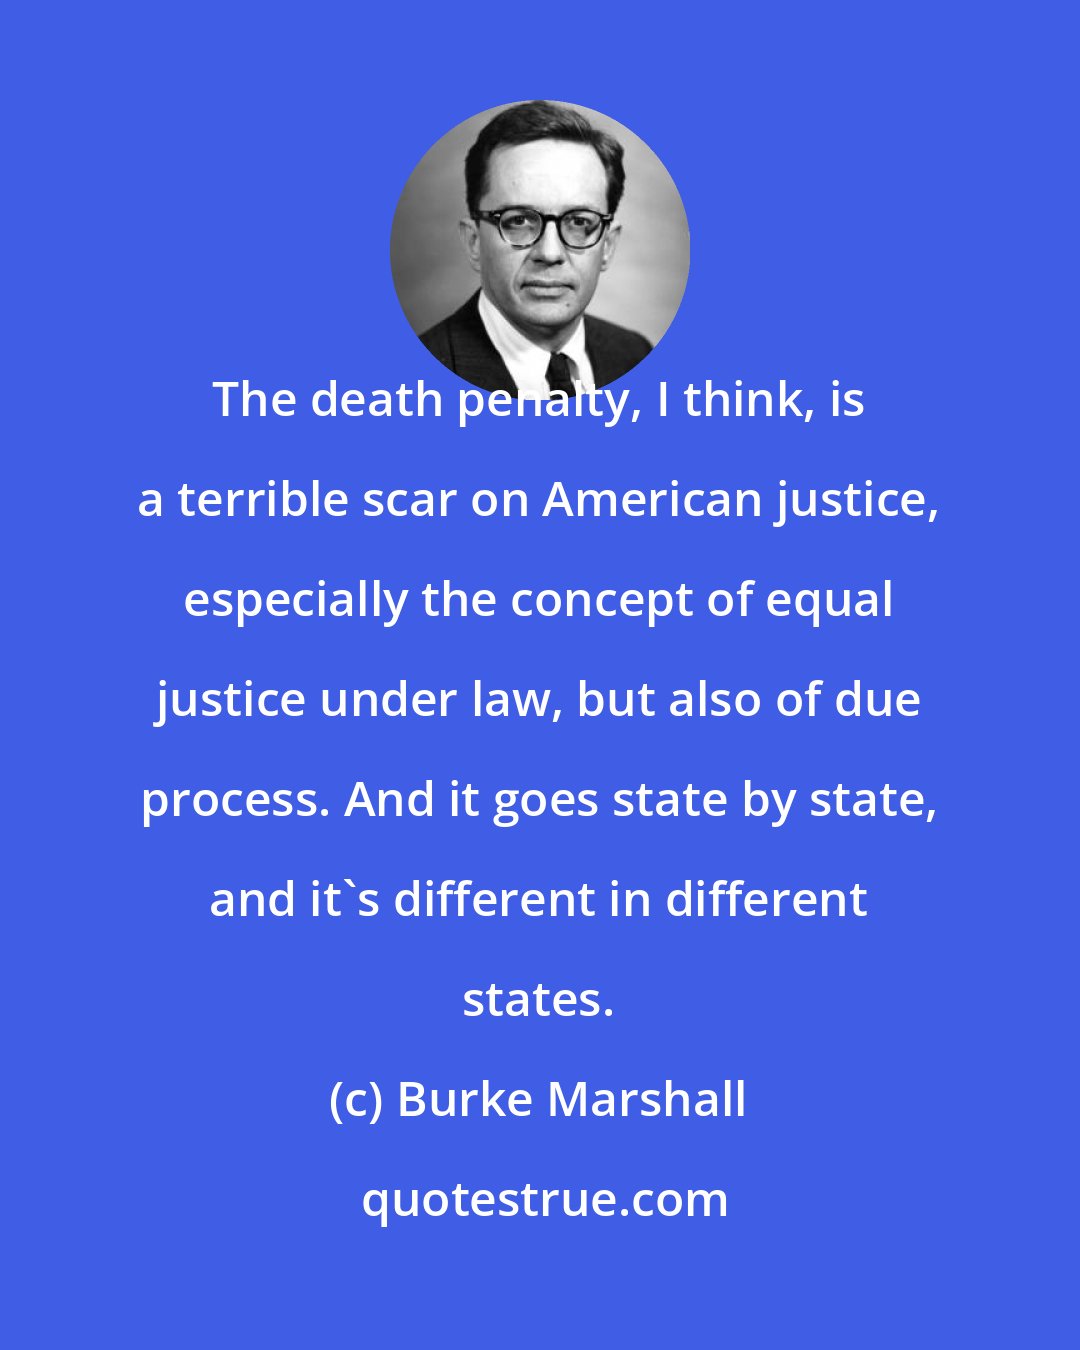 Burke Marshall: The death penalty, I think, is a terrible scar on American justice, especially the concept of equal justice under law, but also of due process. And it goes state by state, and it's different in different states.